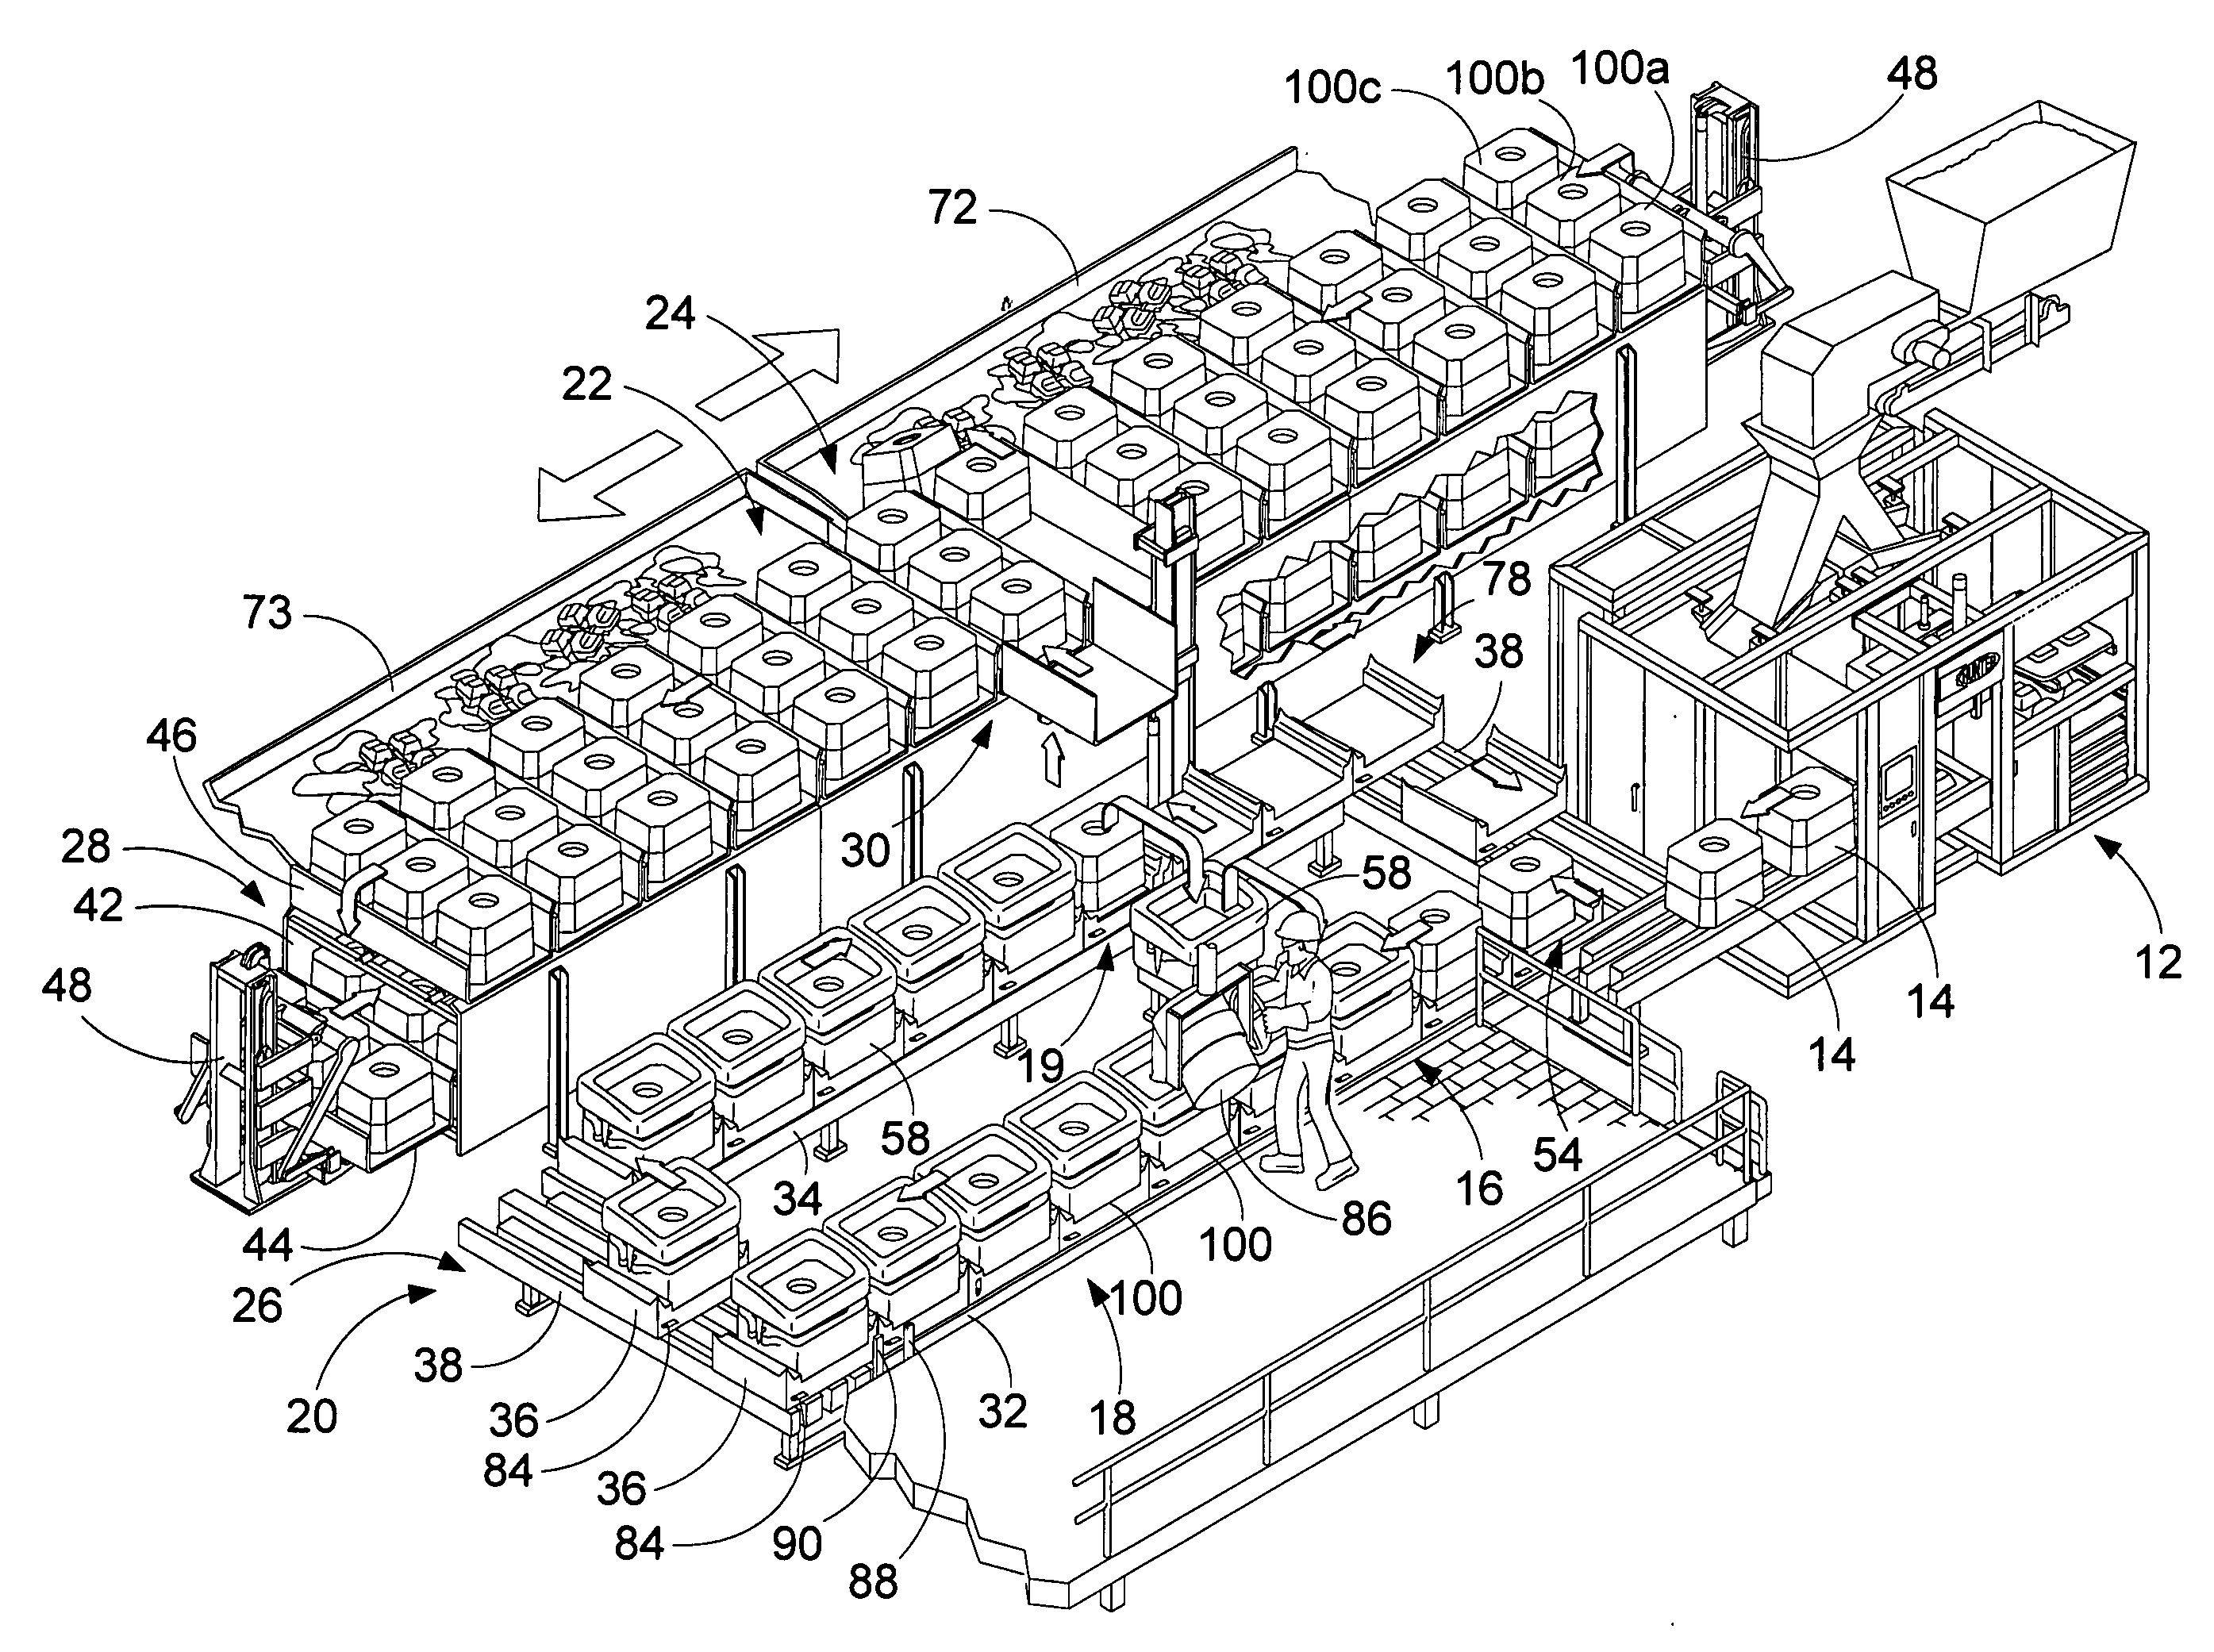 Foundry mold handling system with multiple dump outputs and method